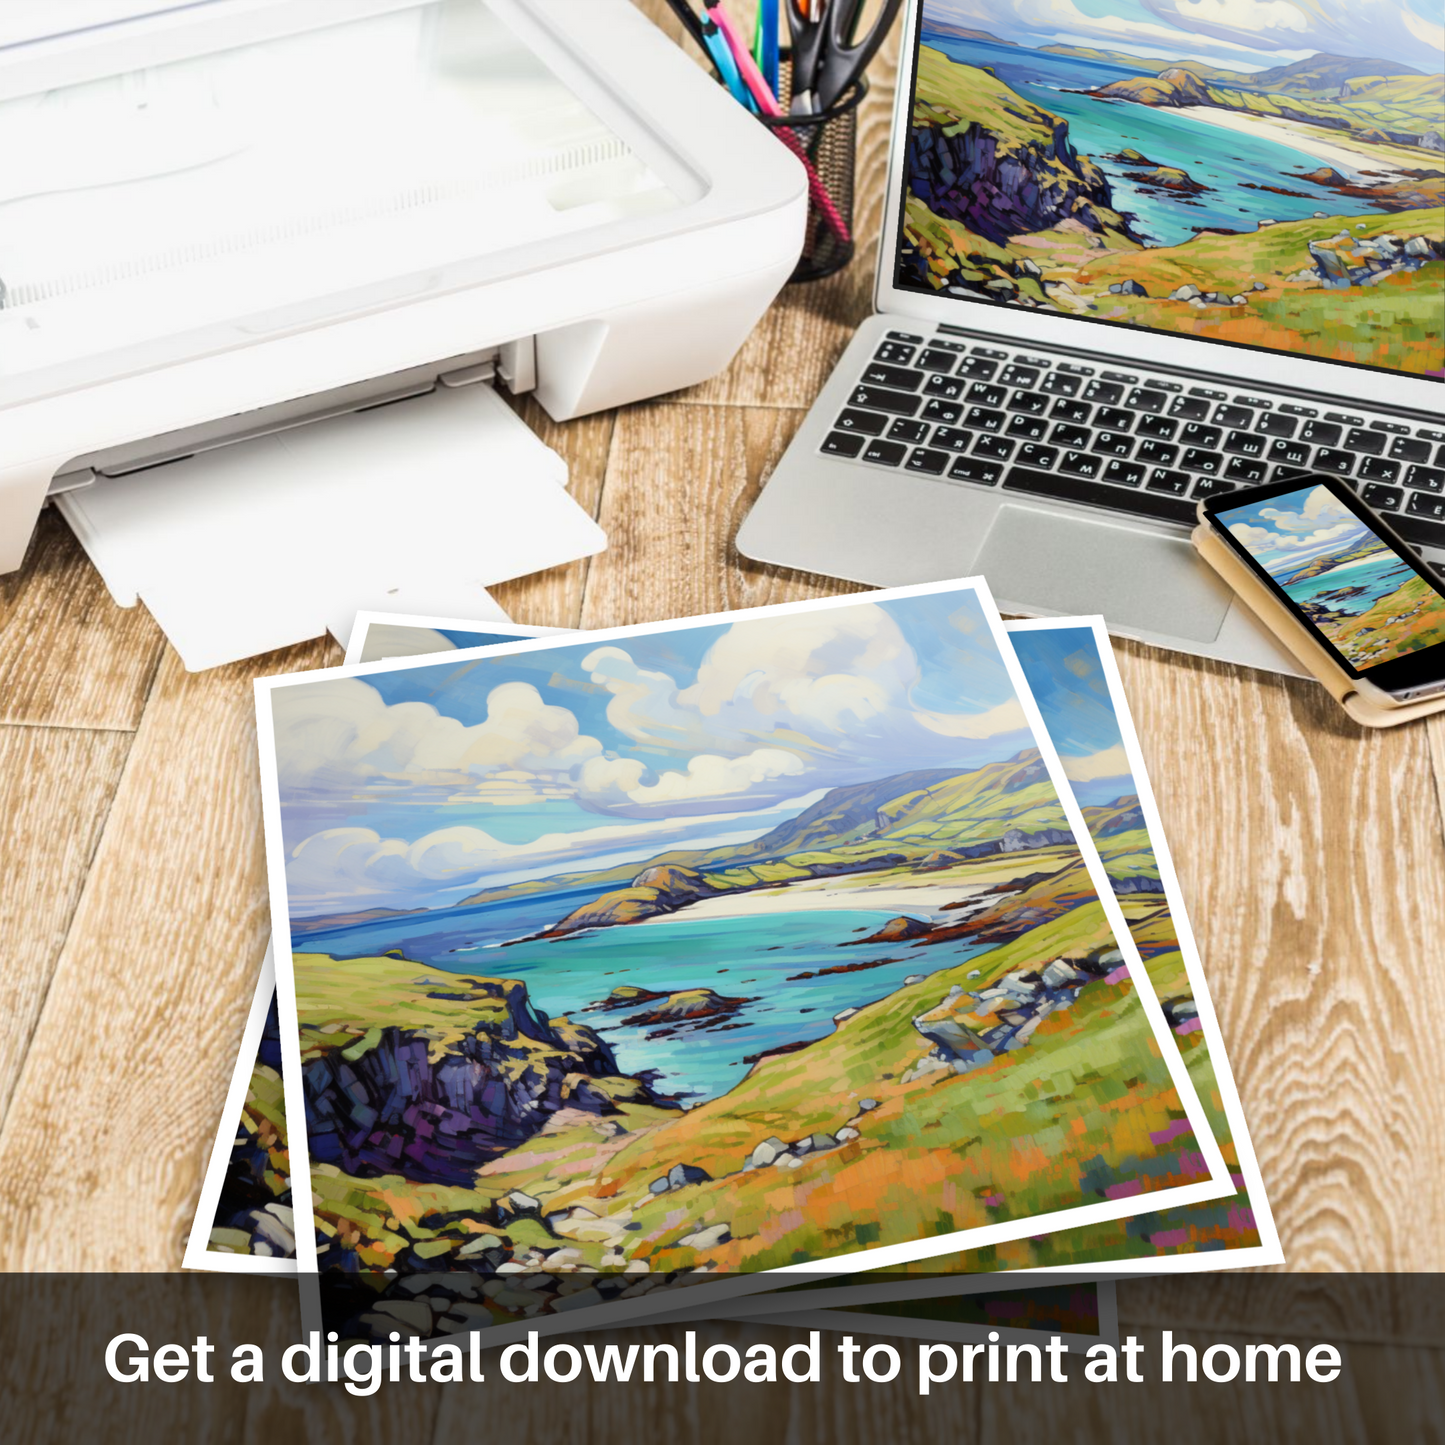 Downloadable and printable picture of Isle of Lewis, Outer Hebrides in summer